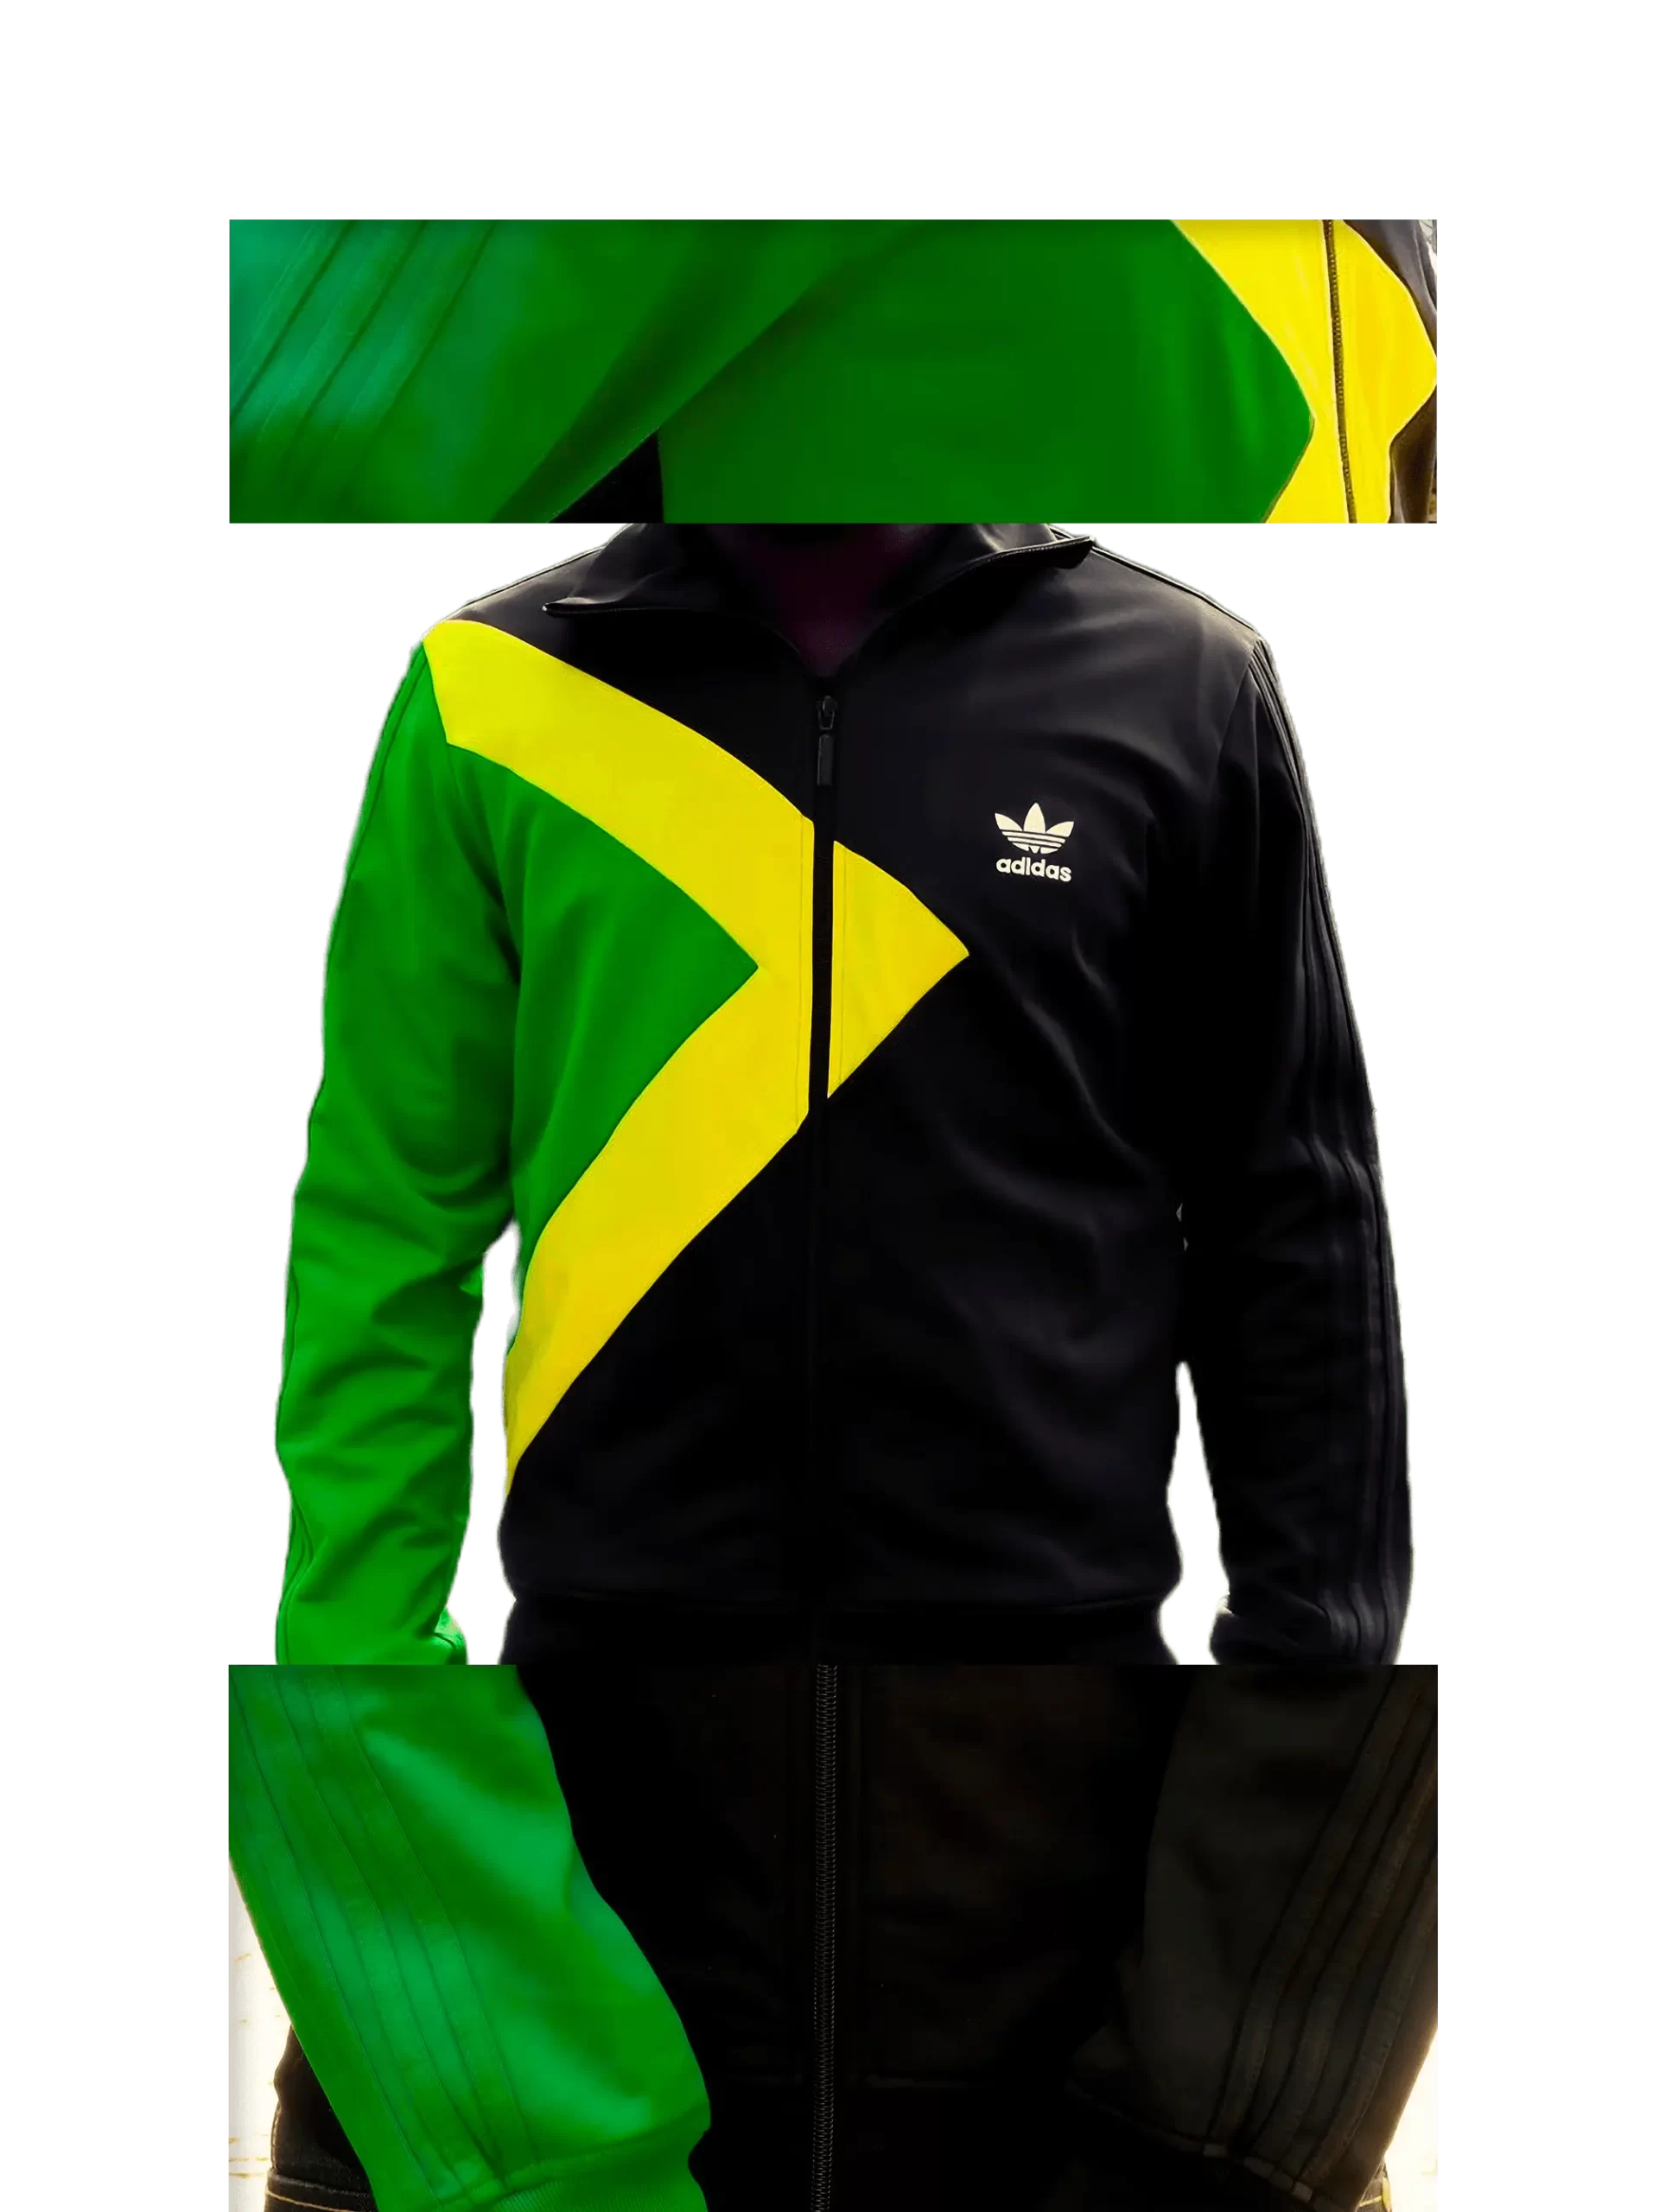 Men's 2007 Cool Runnings Movie Track Top by Adidas: Recognized (EnLawded.com file #lmchk82972ip2y125208kg9st)